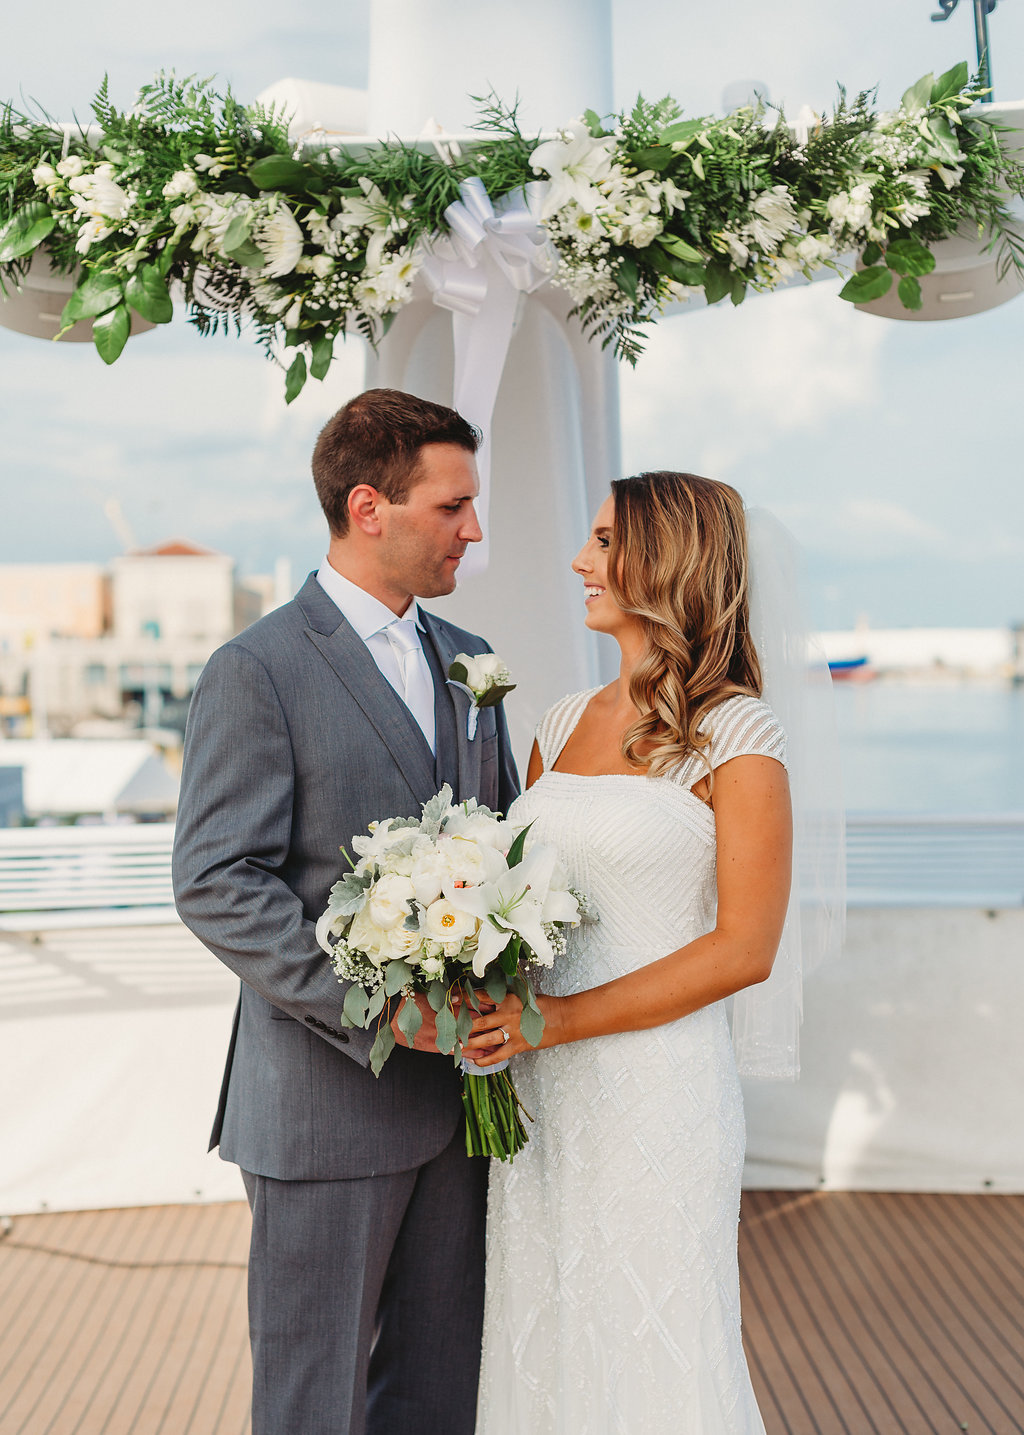 Florida Bride and Groom Wedding Portrait on Deck of Yacht, Bride in Scoop Neck Cap Sleeve Wedding Dress with Greenery, and White, Ivory Floral Bouquet, Groom in Grey Suit | Tampa Waterfront Wedding Venue Yacht Starship IV